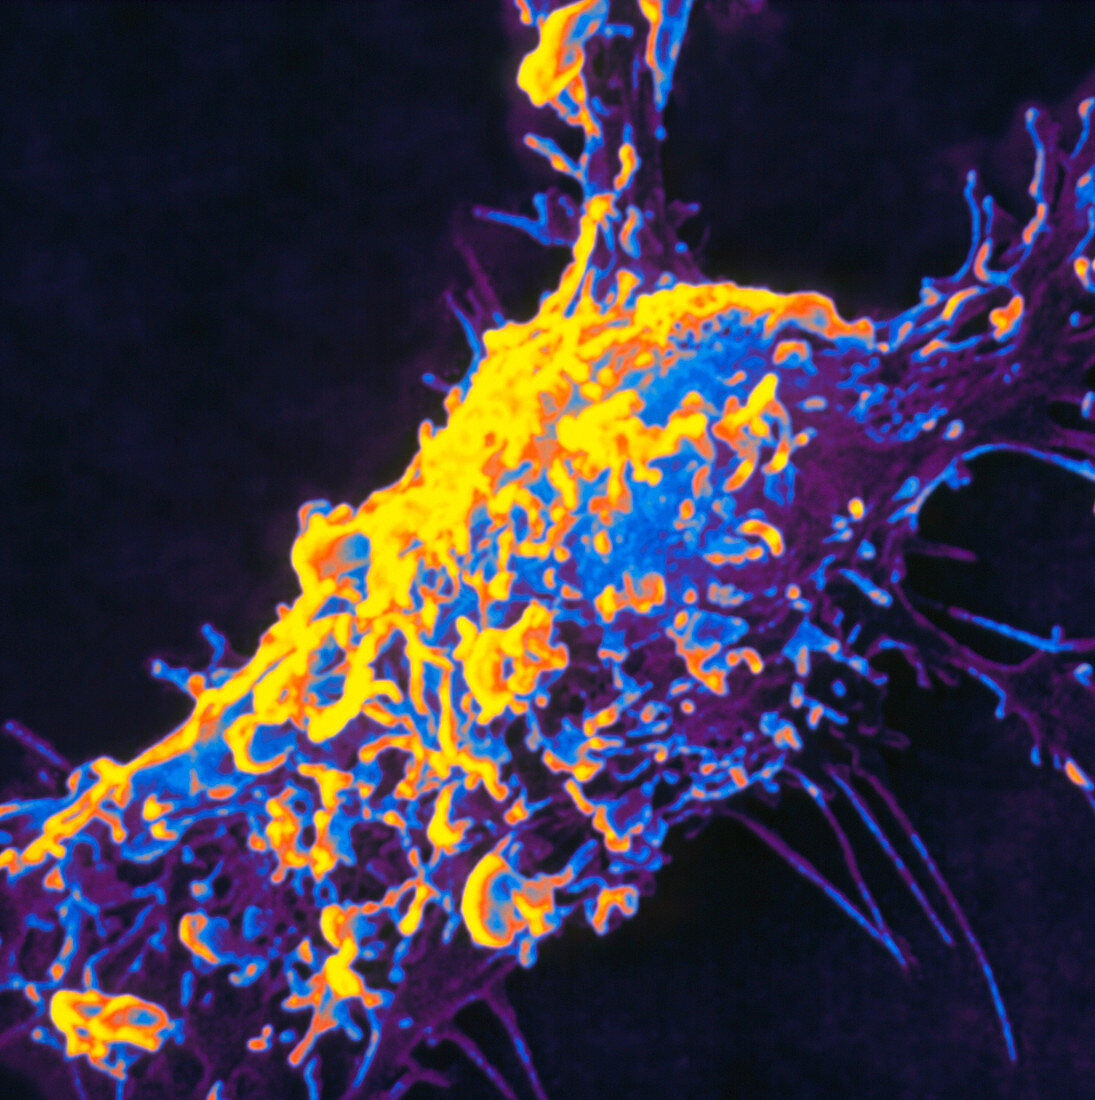 Scanning electron micrograph of endothelial cell